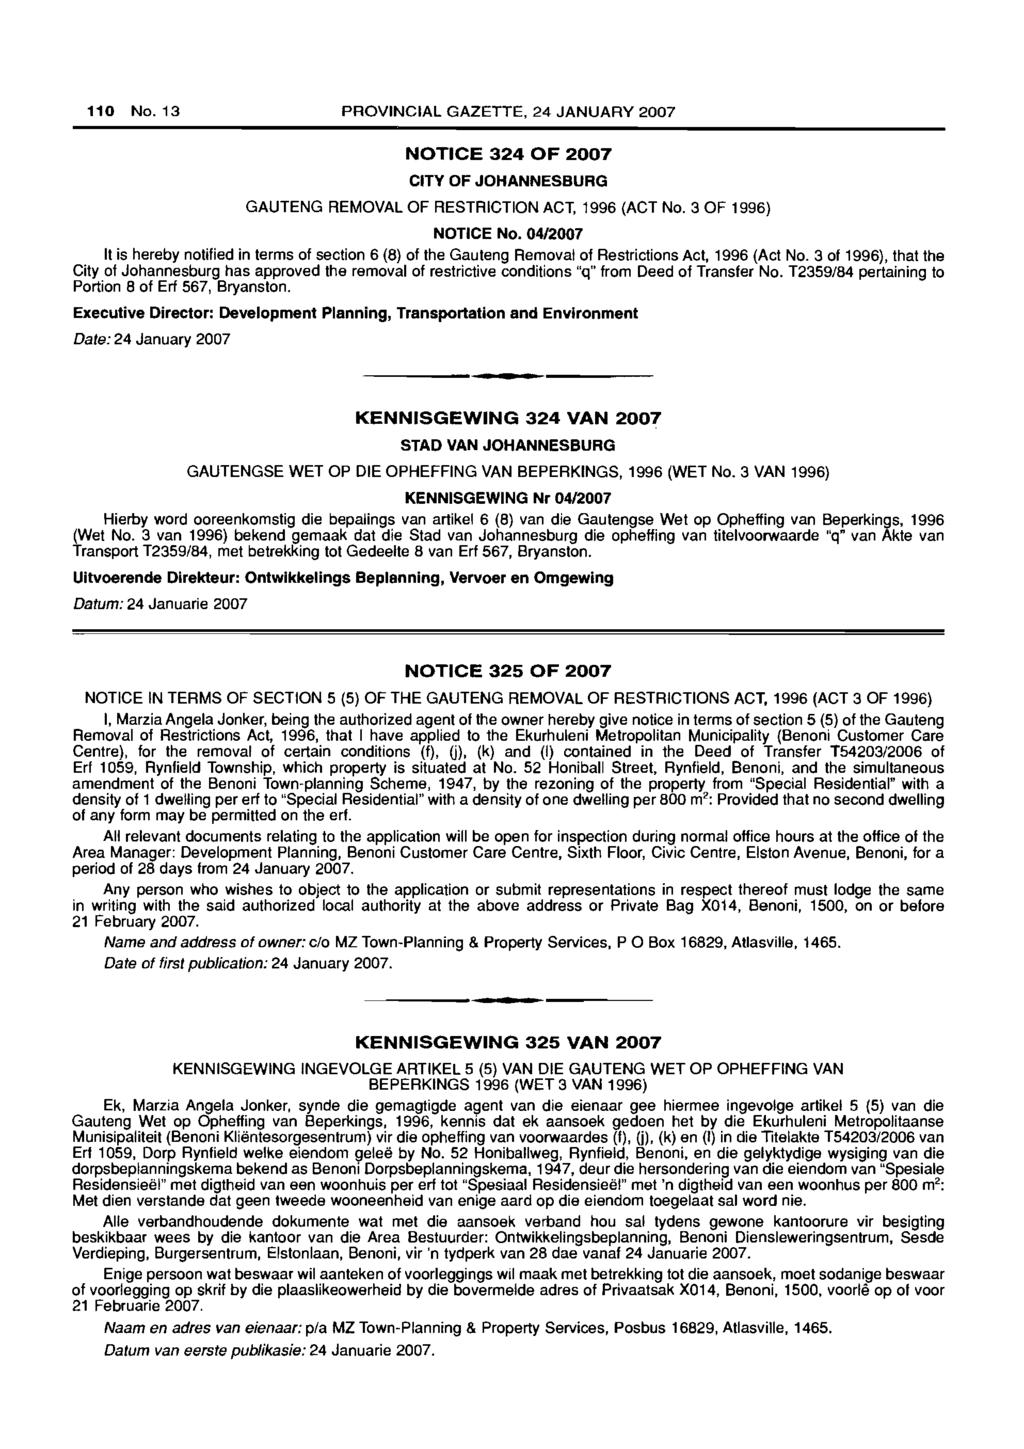 110 No.13 PROVINCIAL GAZETTE, 24 JANUARY 2007 NOTICE 324 OF 2007 CITY OF JOHANNESBURG GAUTENG REMOVAL OF RESTRICTION ACT, 1996 (ACT No. 3 OF 1996) NOTICE No.